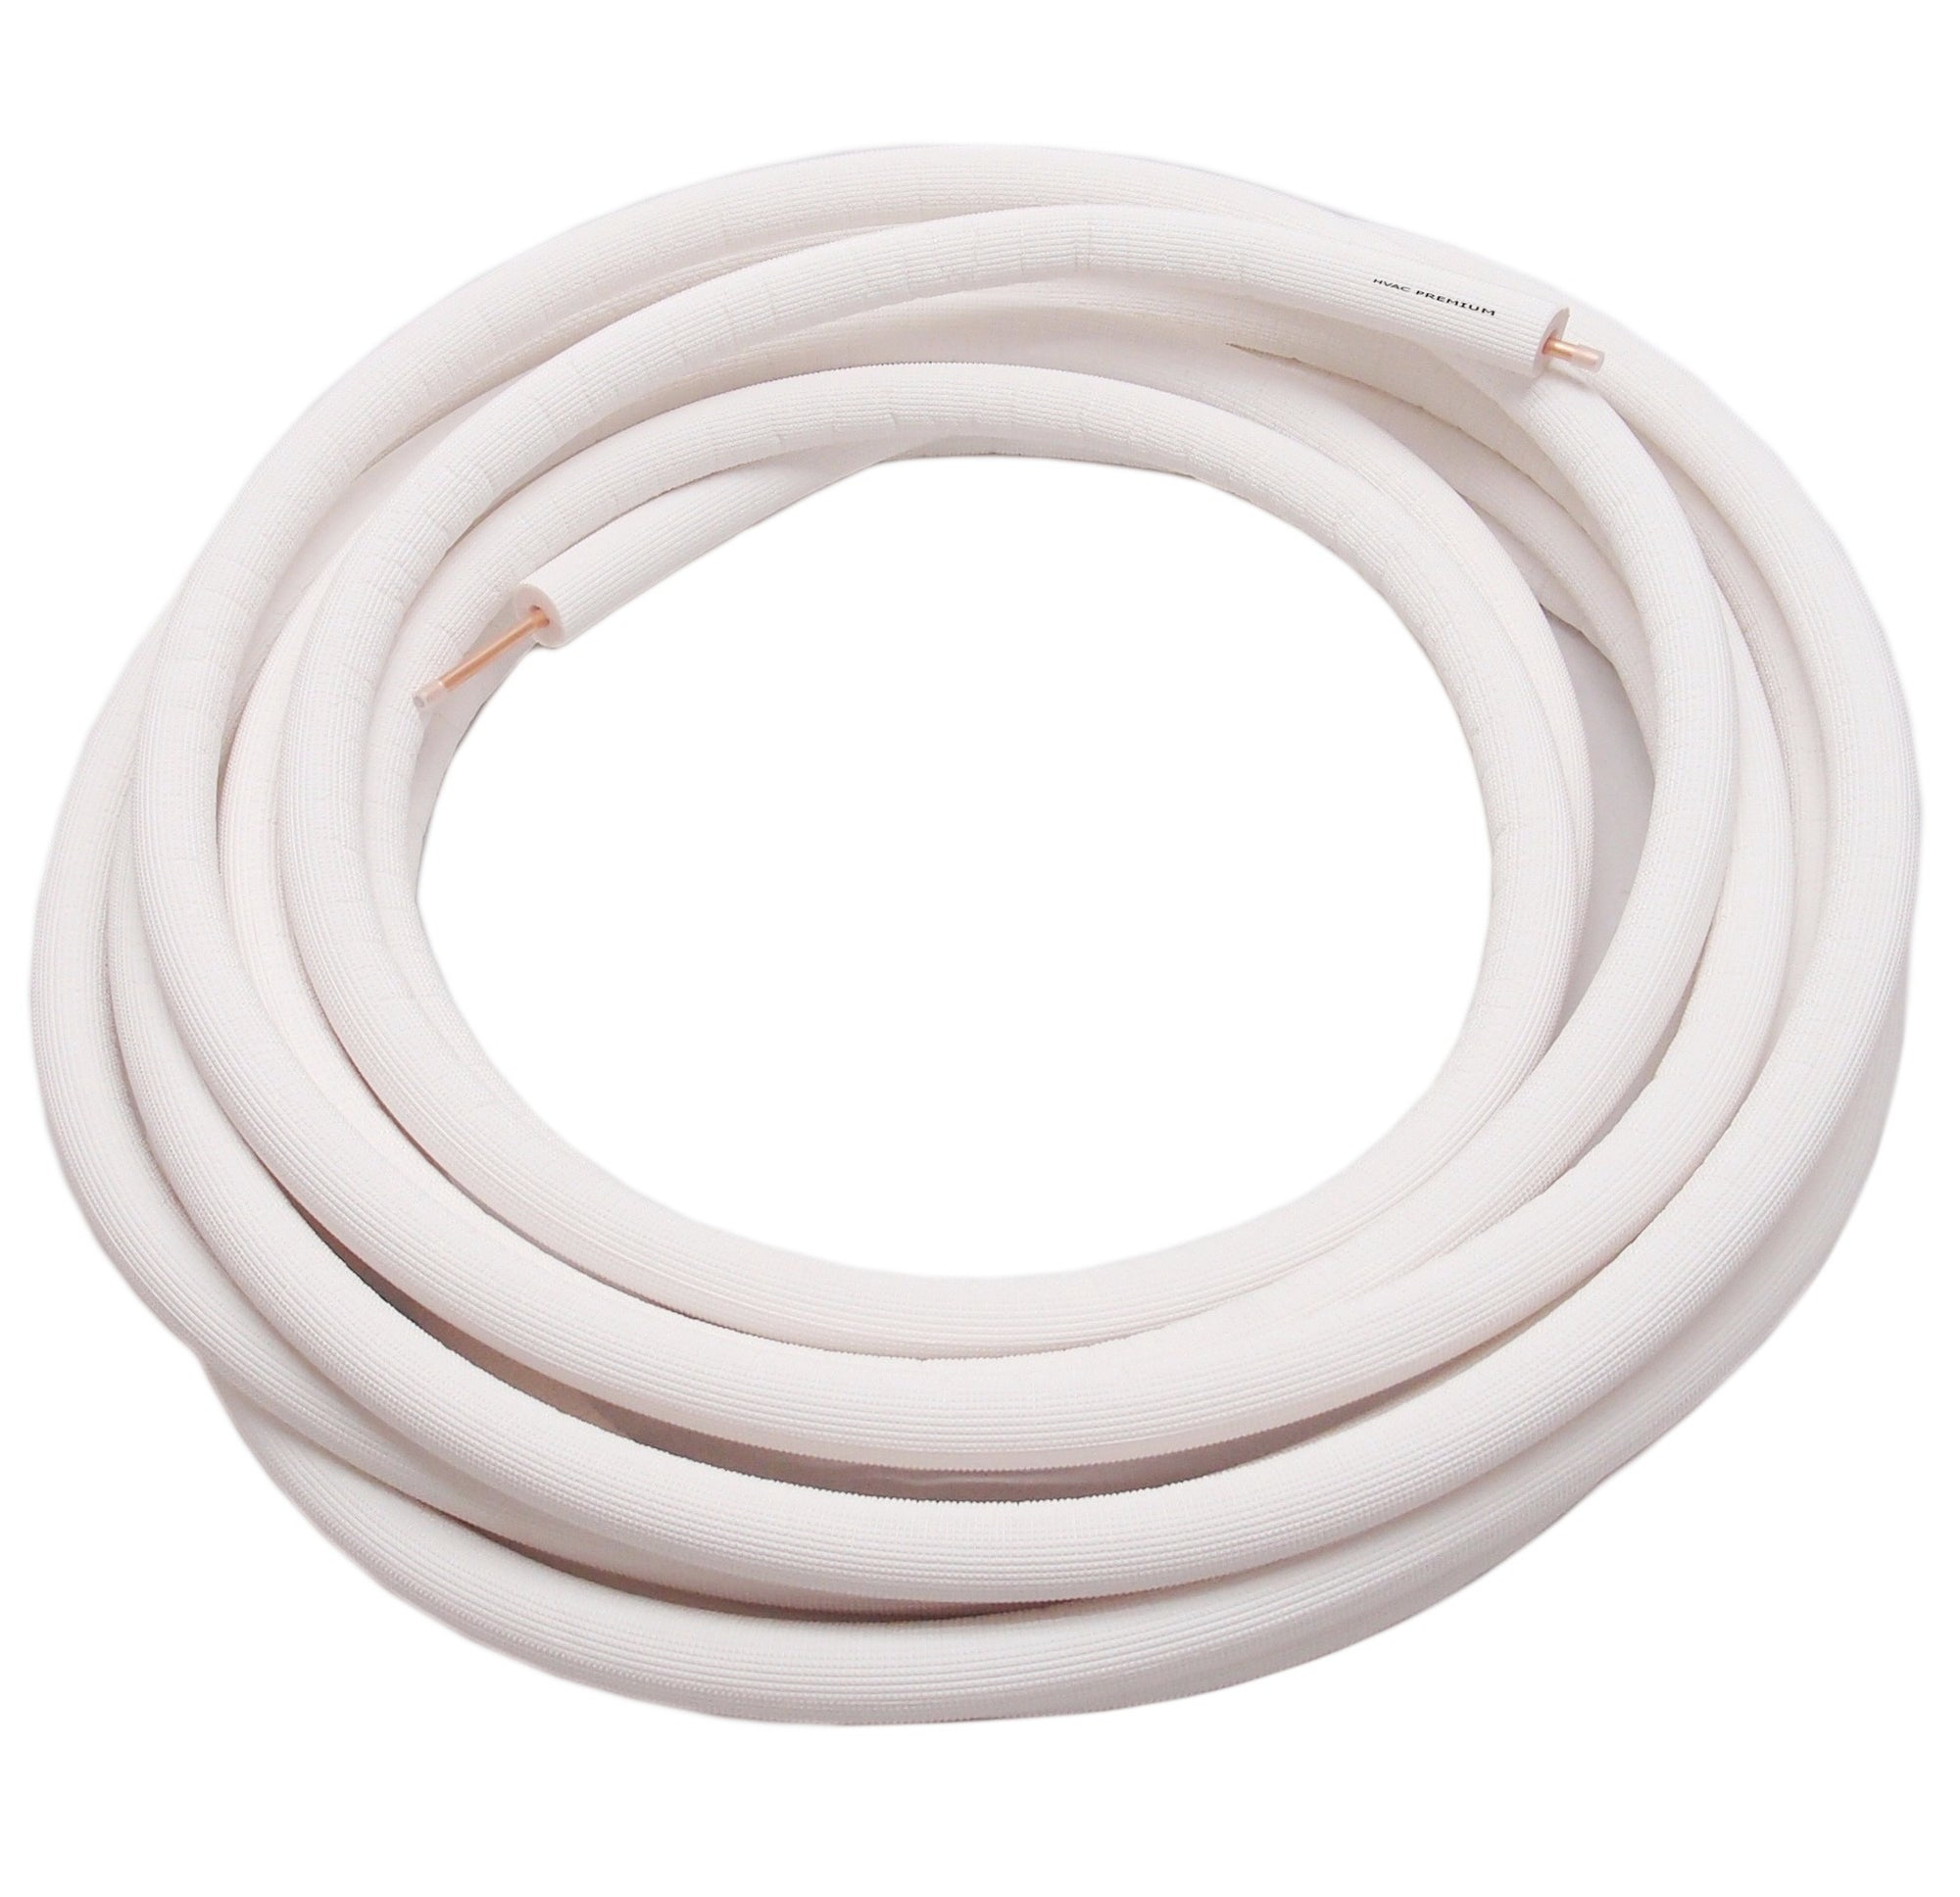 1-1/8" Insulated Copper Coil Line - Seamless Pipe Tube for HVAC, Refrigerant - 1/2" White Insulation - 50' Long